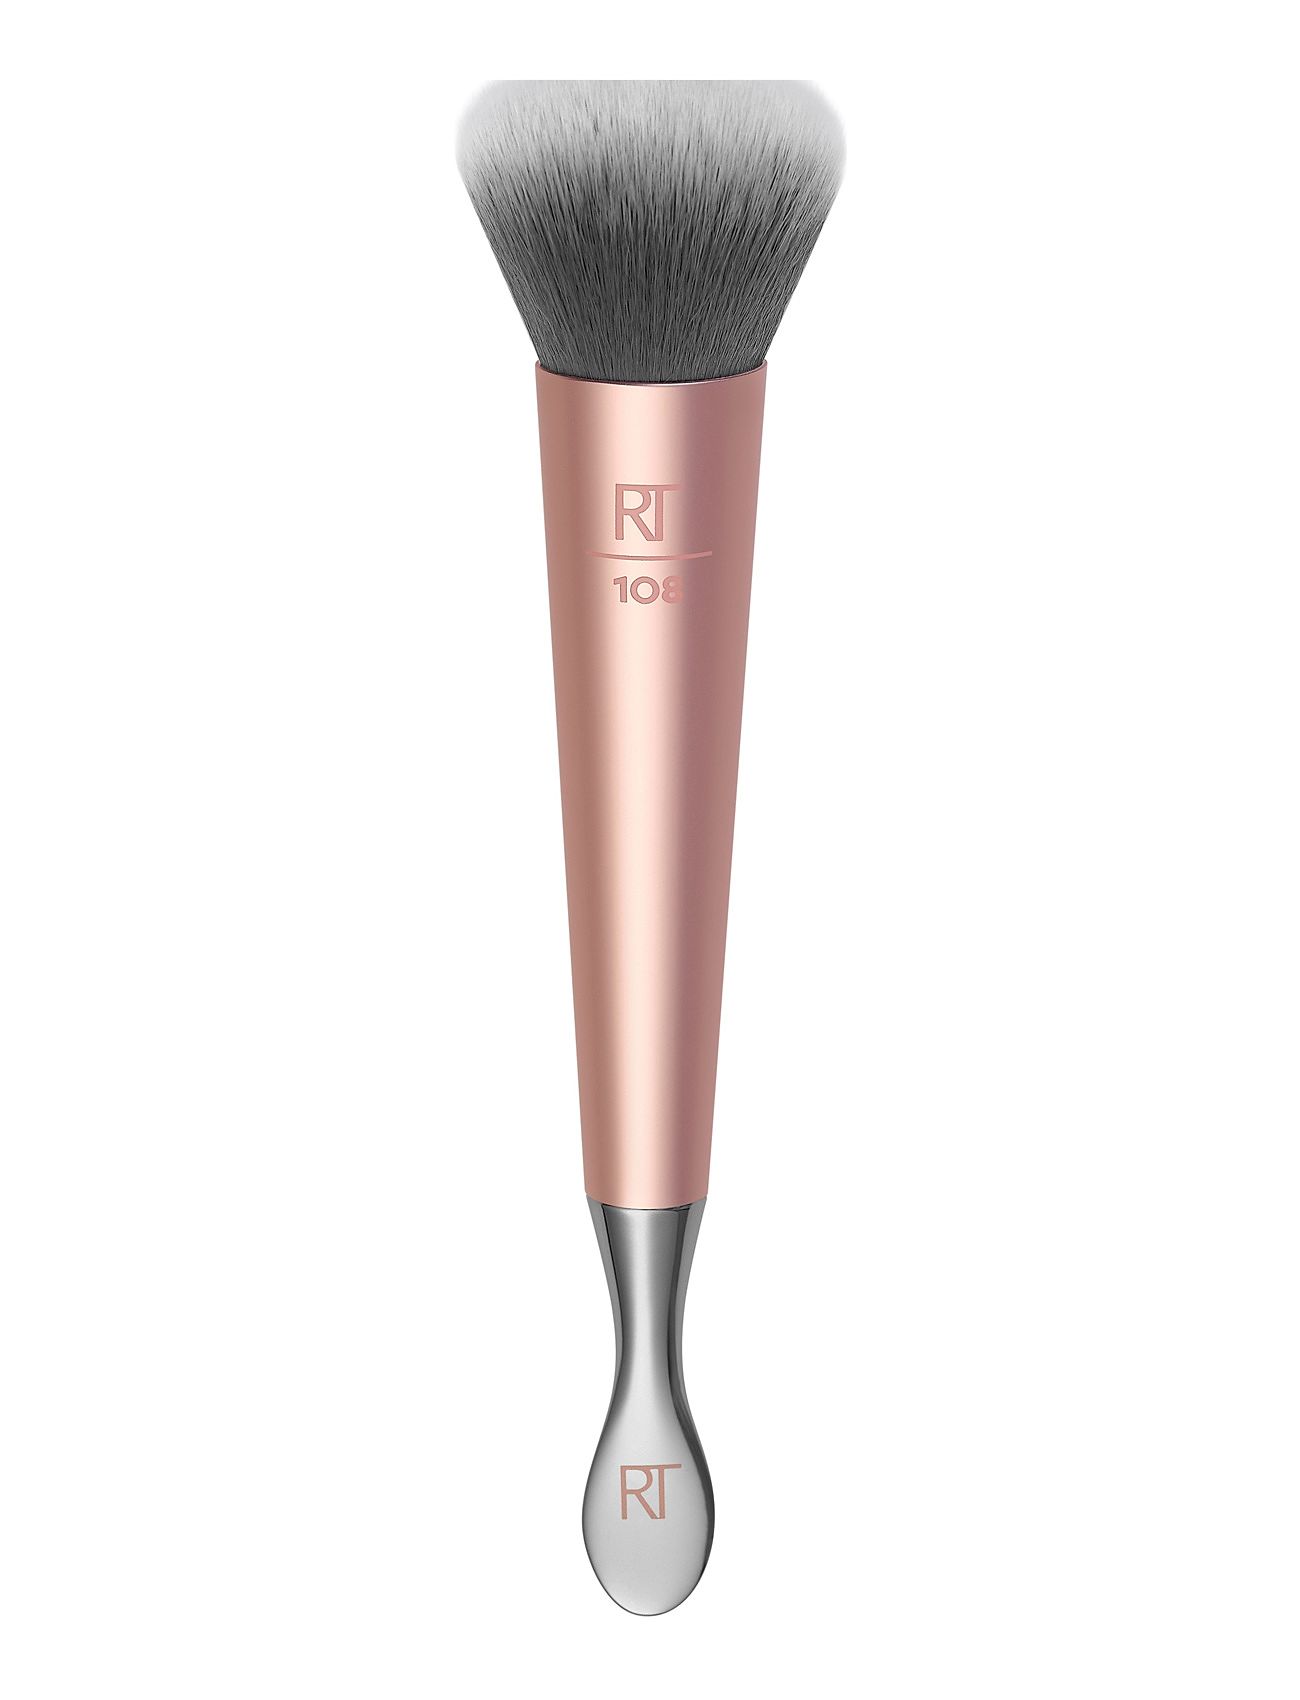 Real Techniques Priming Jar Brush Beauty Women Makeup Makeup Brushes Face Brushes Foundation Brushes Pink Real Techniques